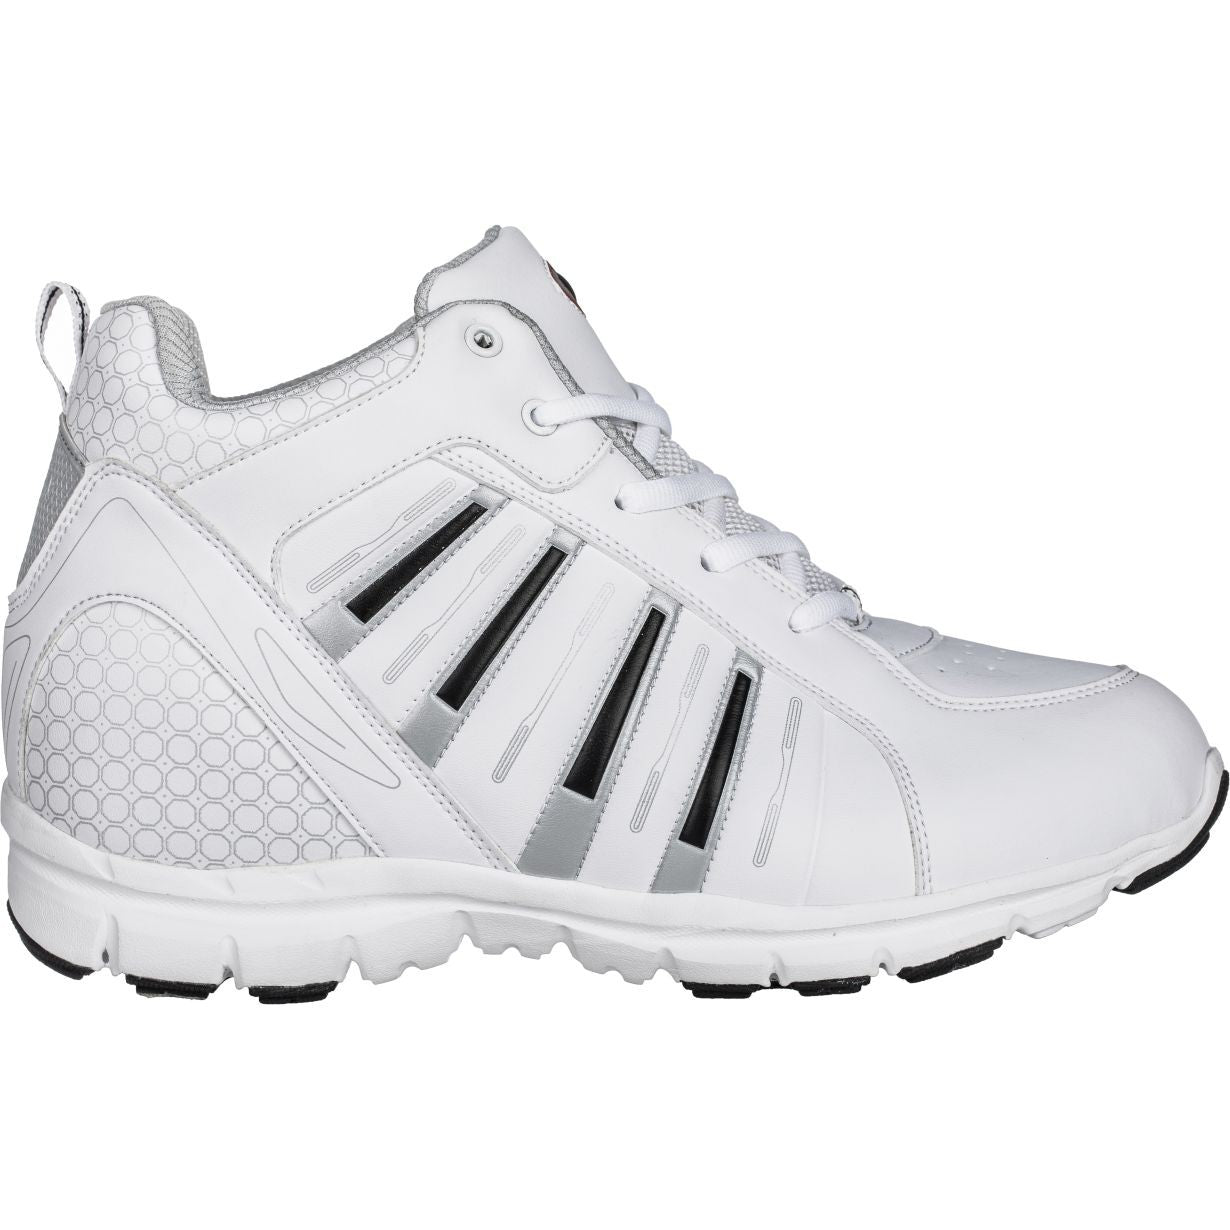 Elevator shoes height increase CALDEN - K33291 - 3.8 Inches Taller (White) - Lightweight